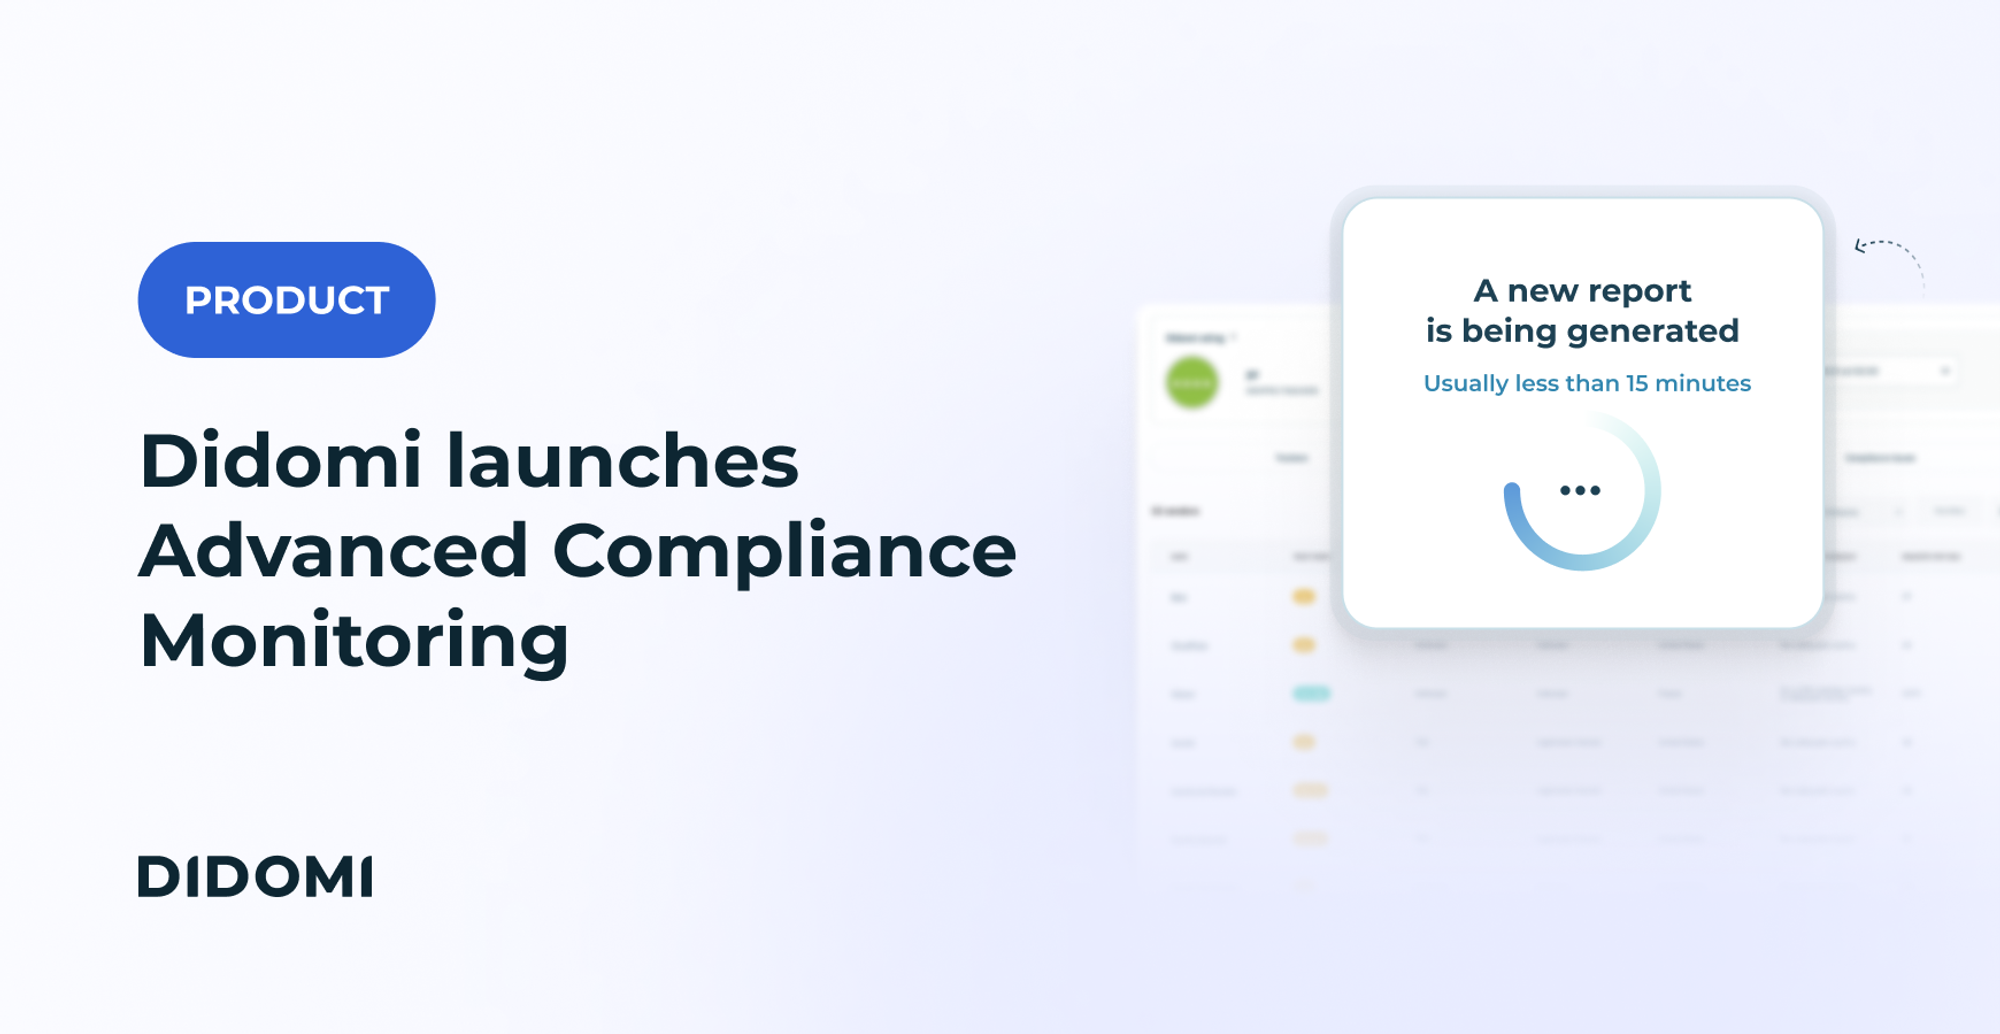 A mockup of Didomi's product with the title "Didomi launches Advanced Compliance Monitoring"